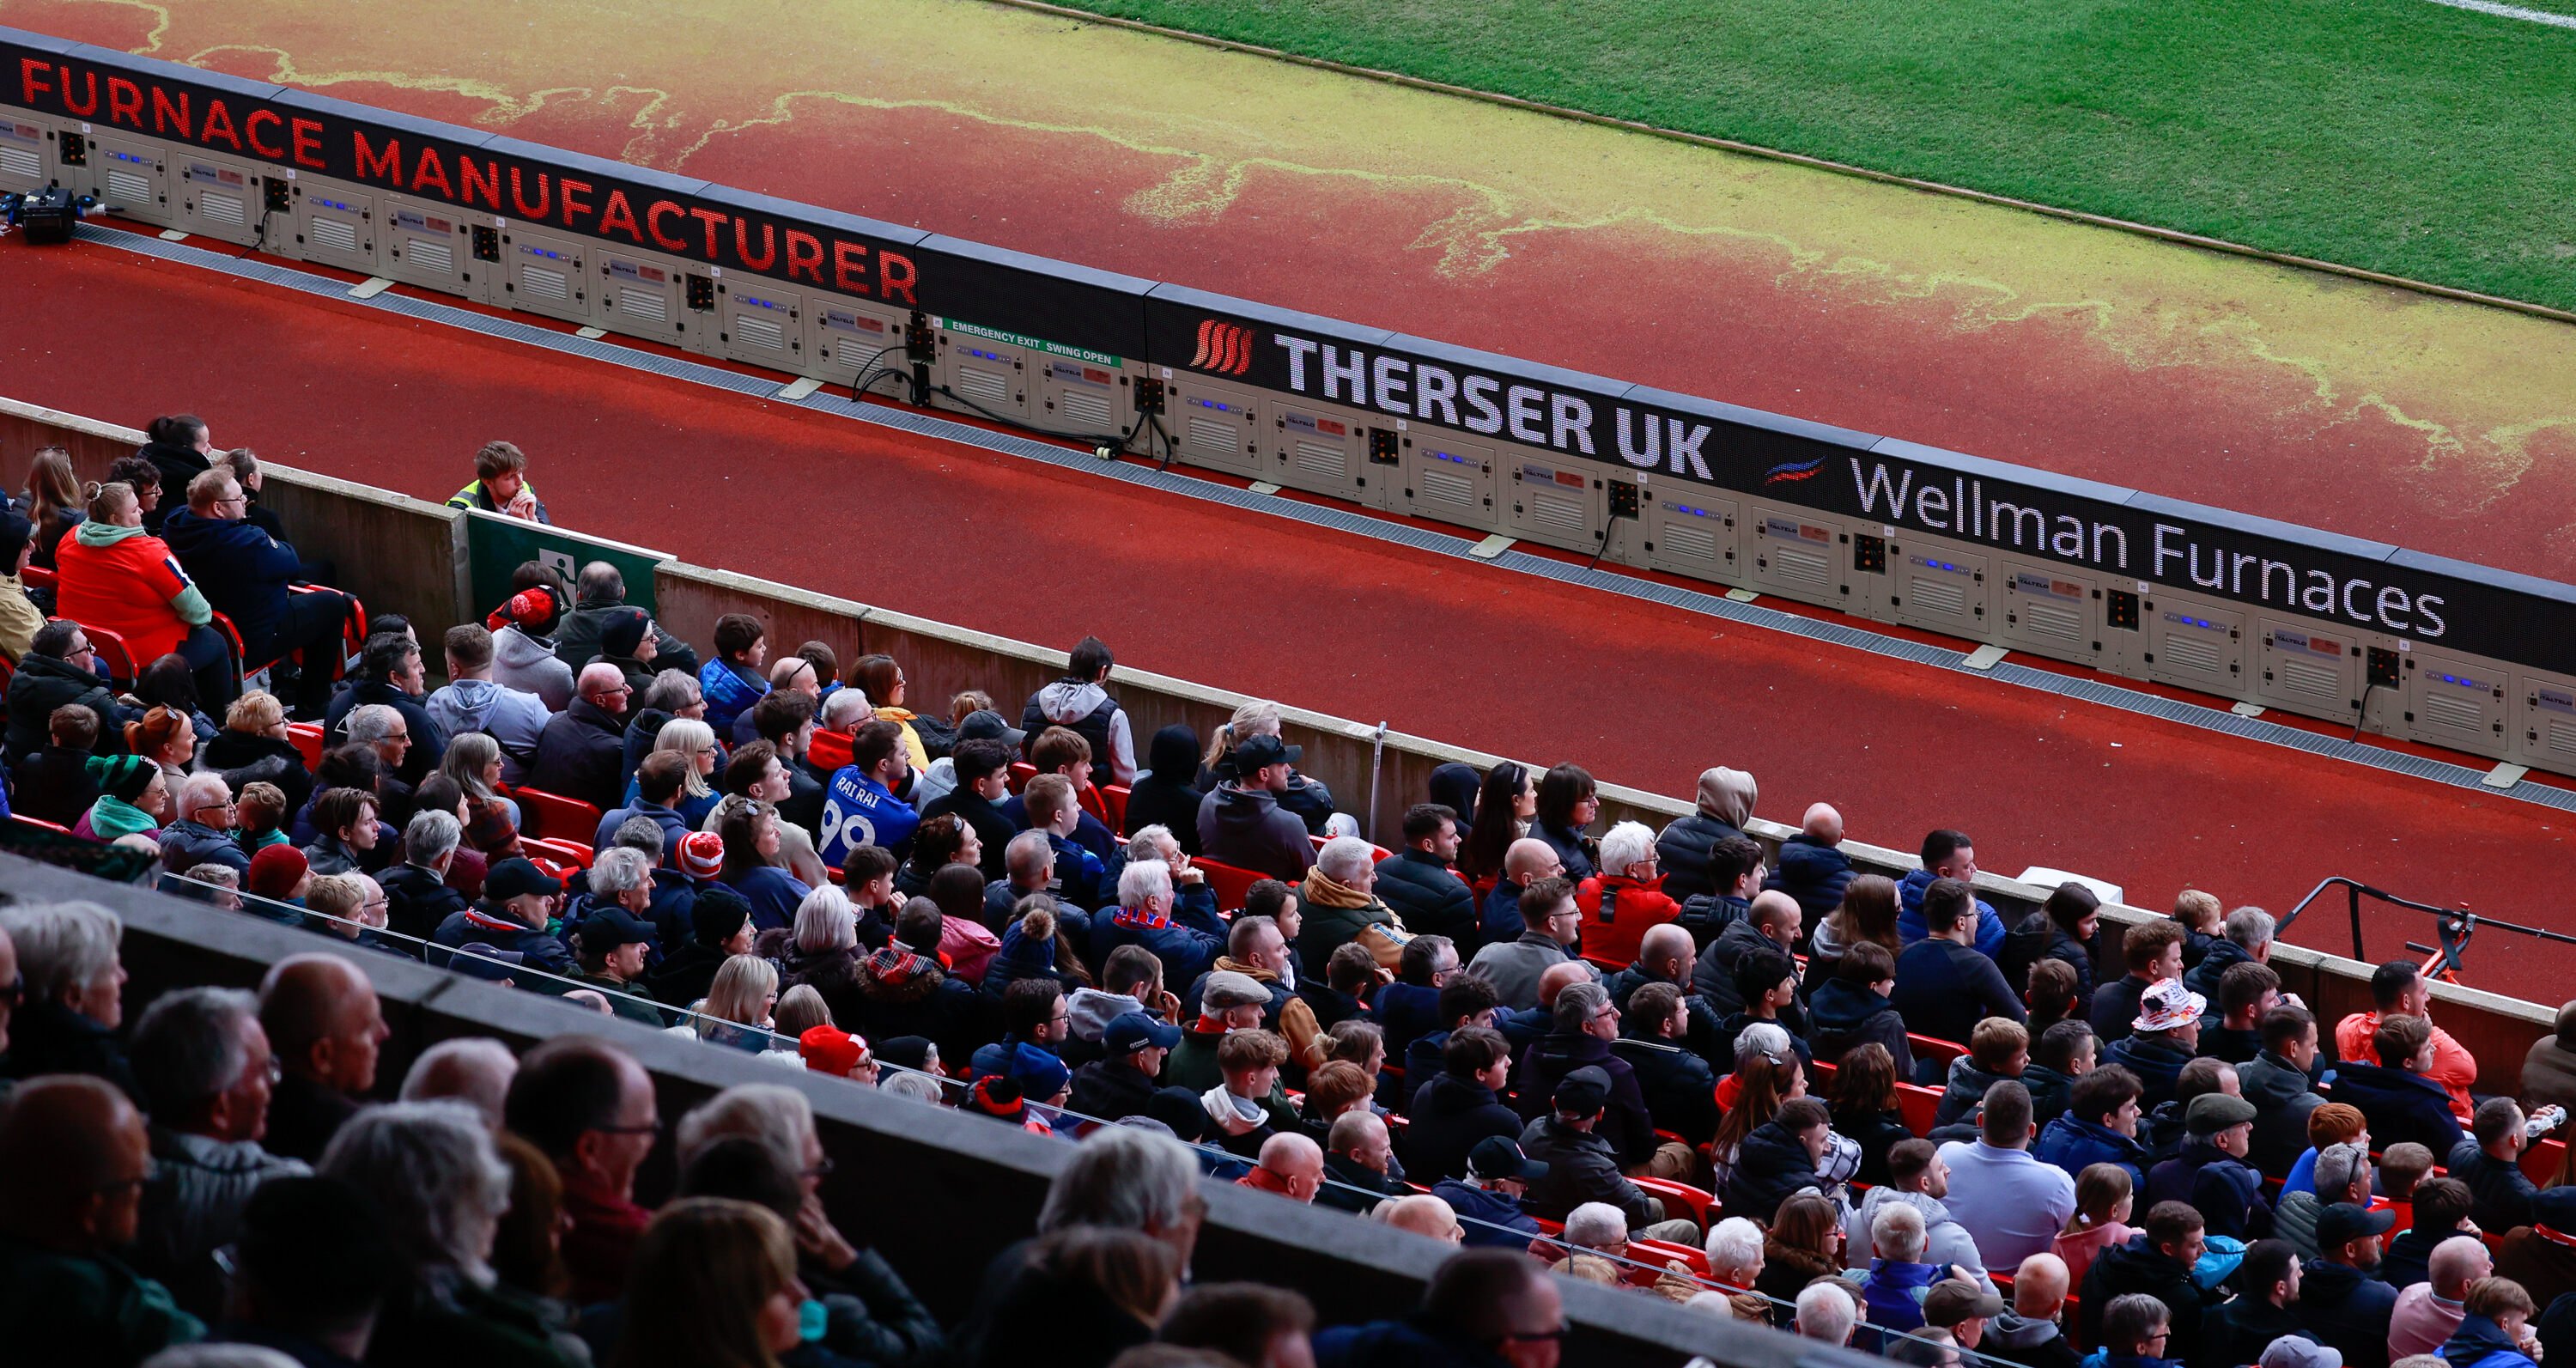 THERSER UK's latest Advertising Partnership with Stoke City Football Club